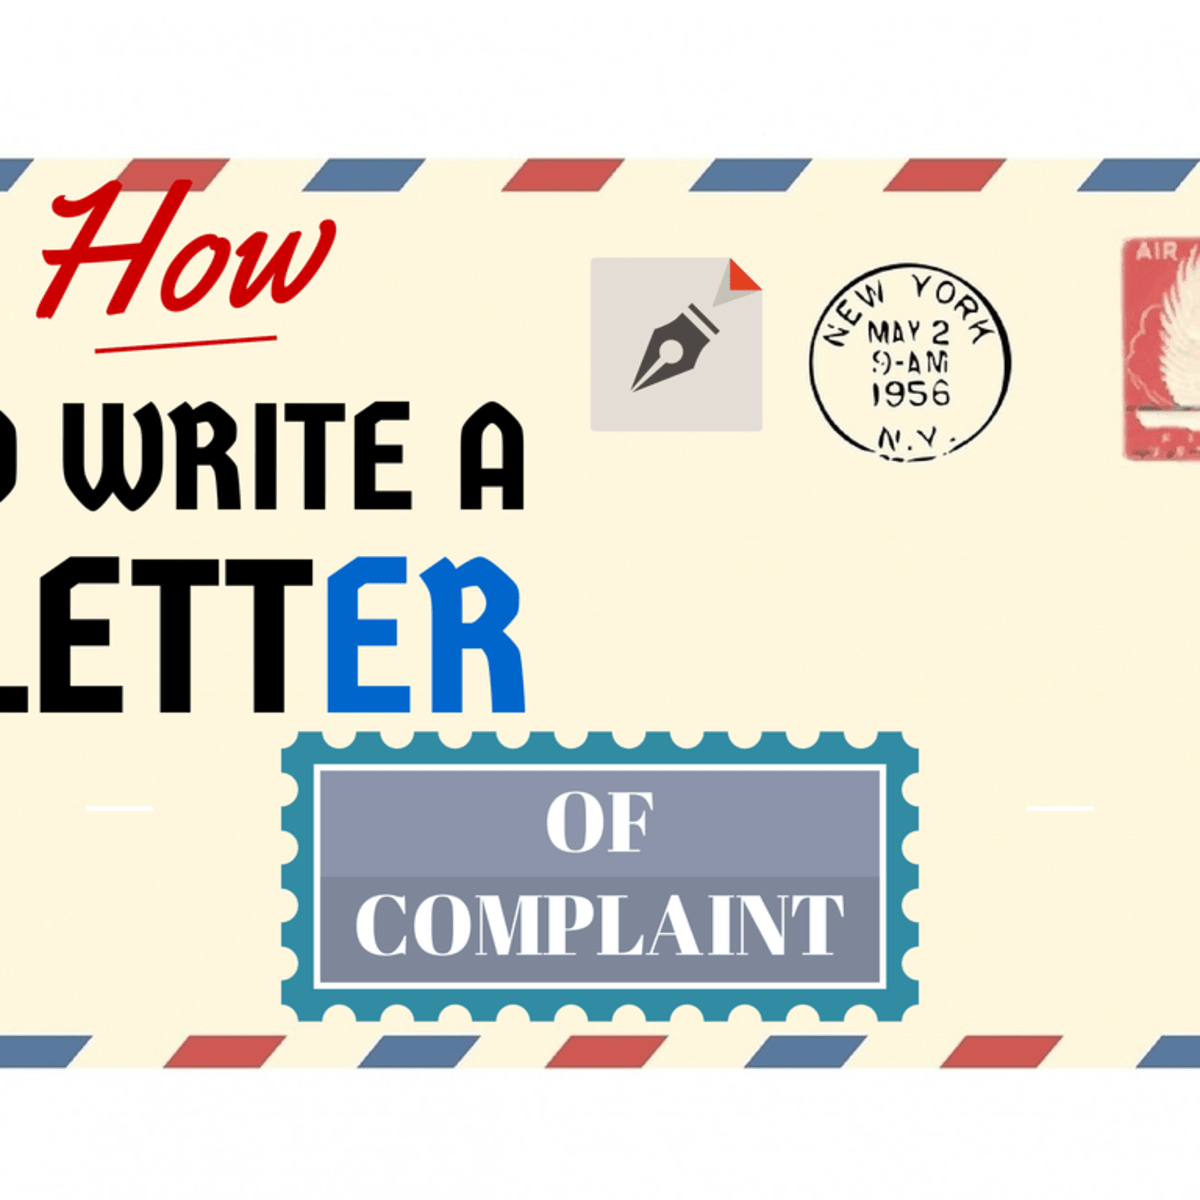 How To Write An Effective Complaint To A Company Step By Step Guide And Sample Letters Toughnickel